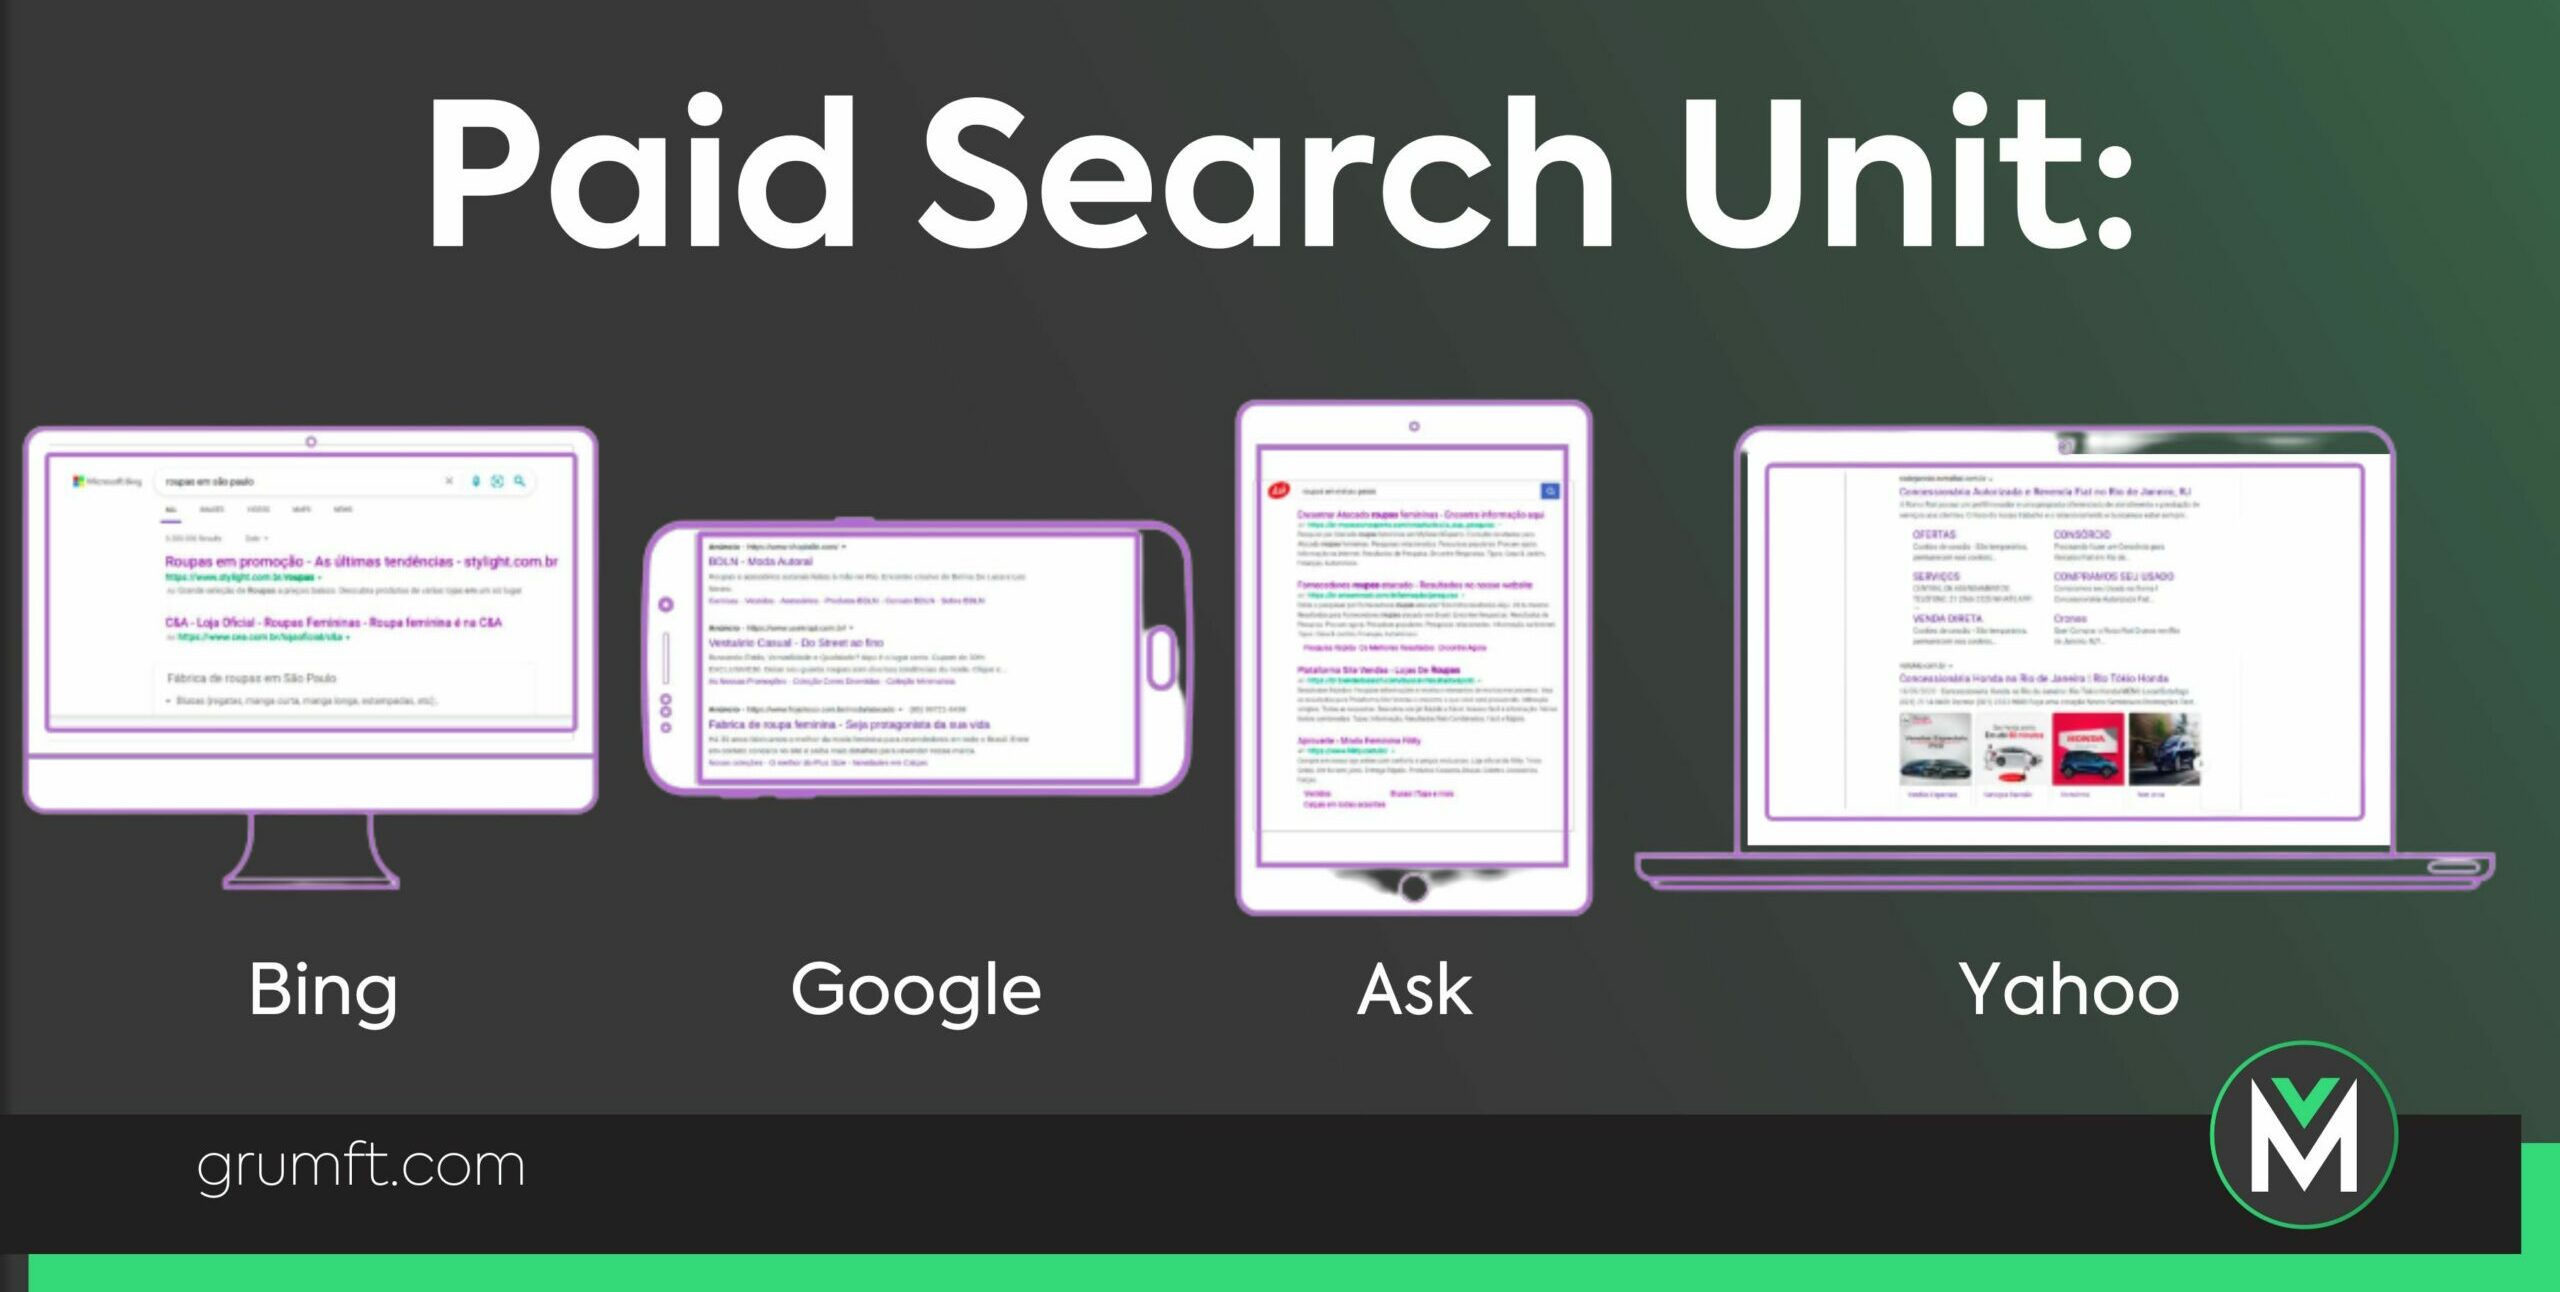 Paid Search Unit: